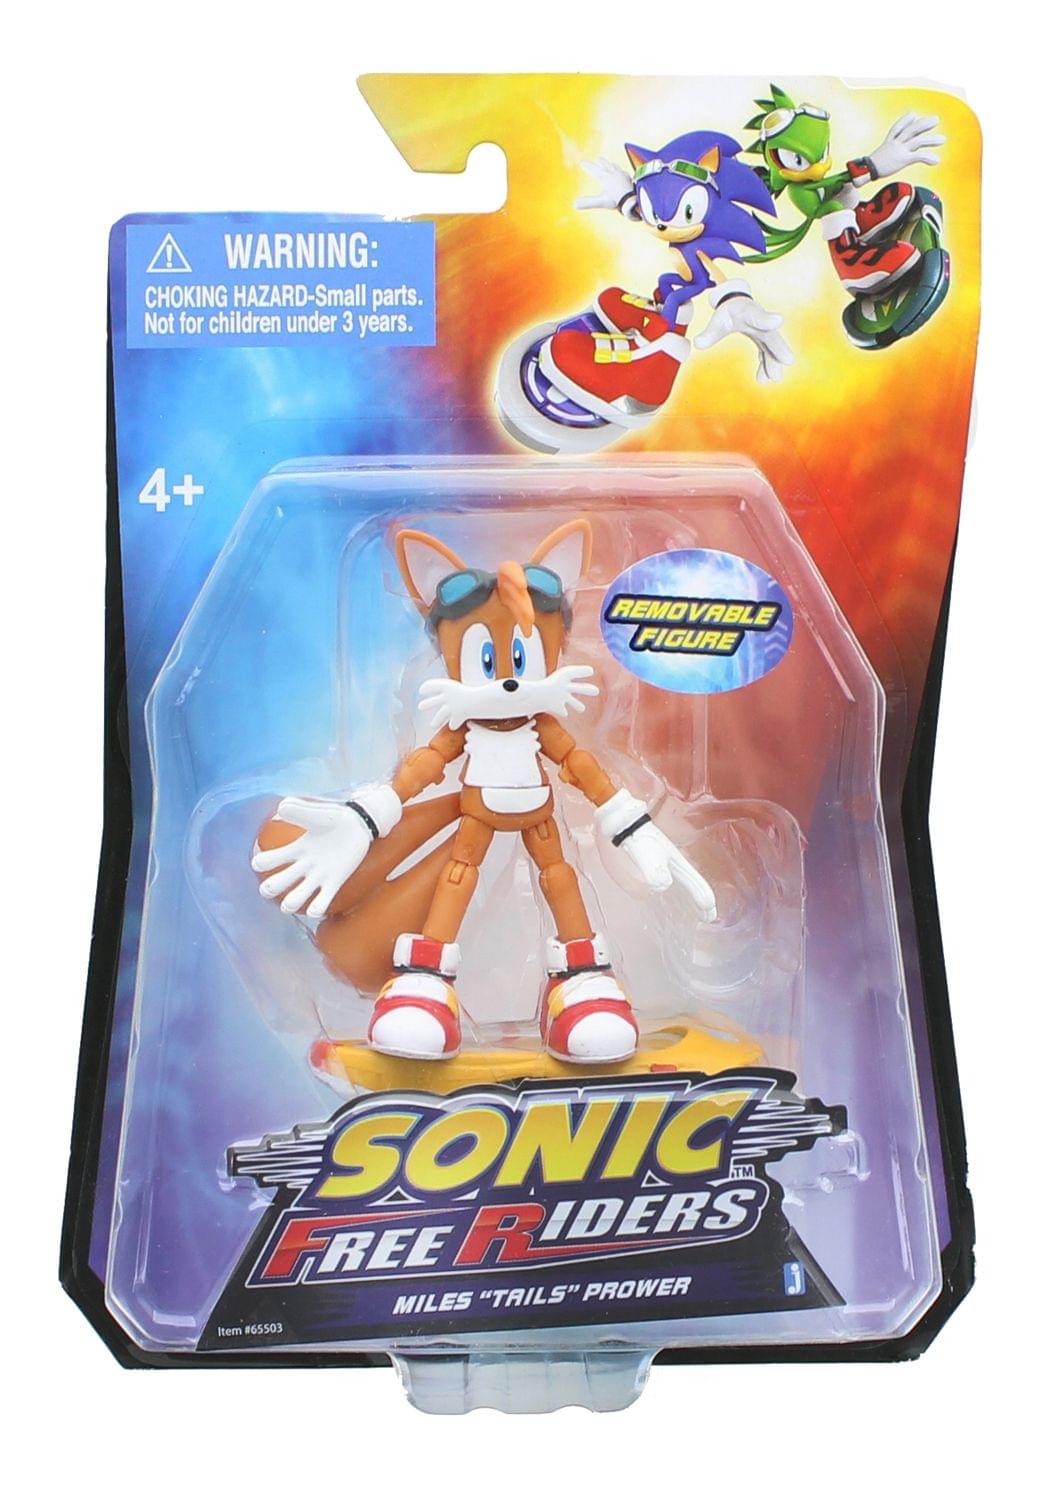 Sonic Free Riders Action Figure: Tails